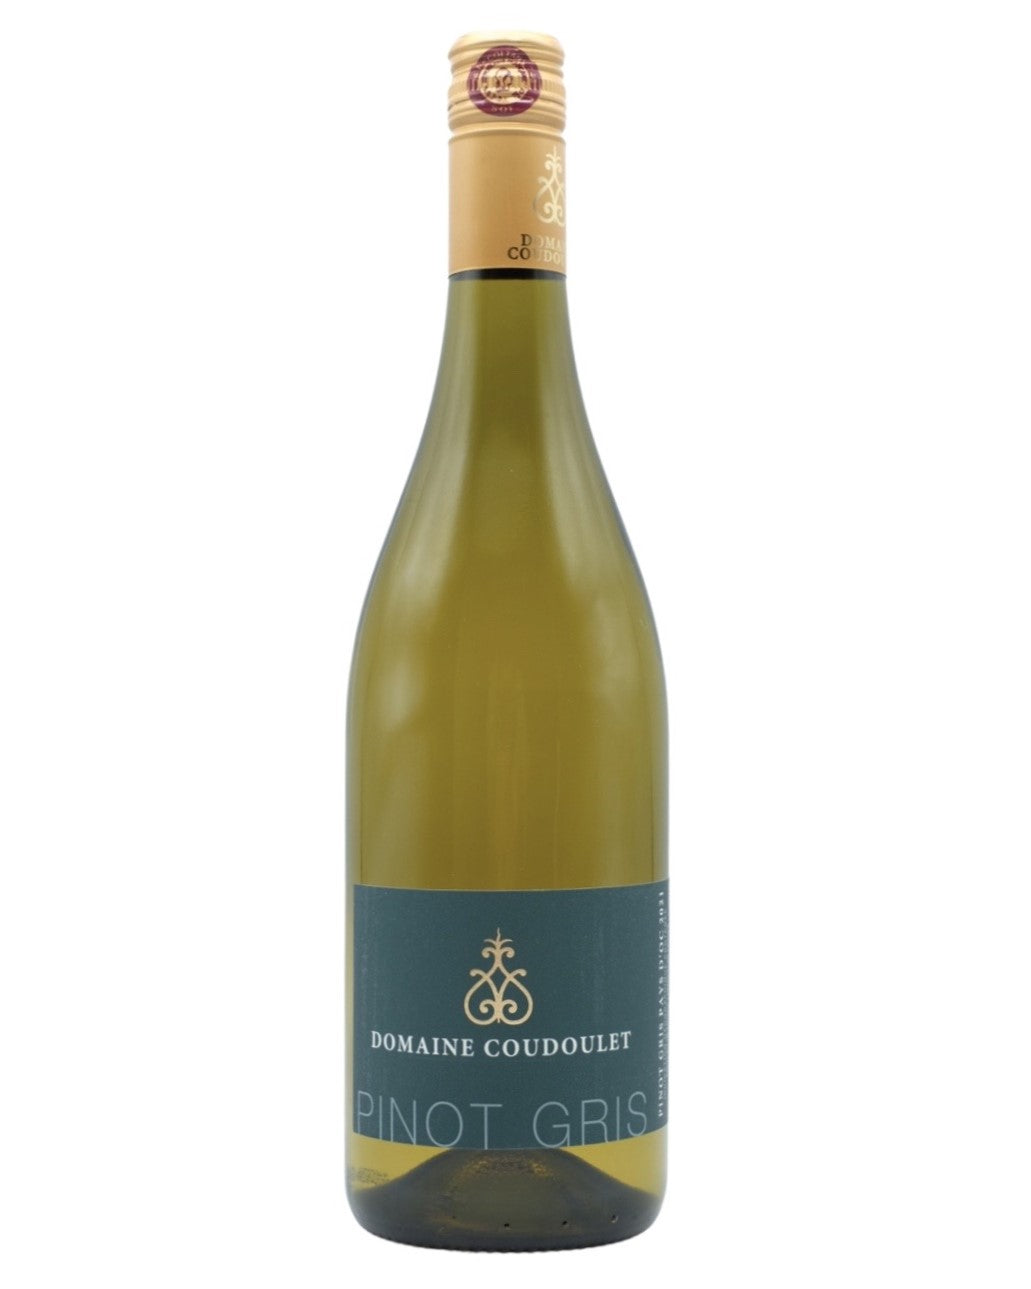 Coudoulet Pinot Gris